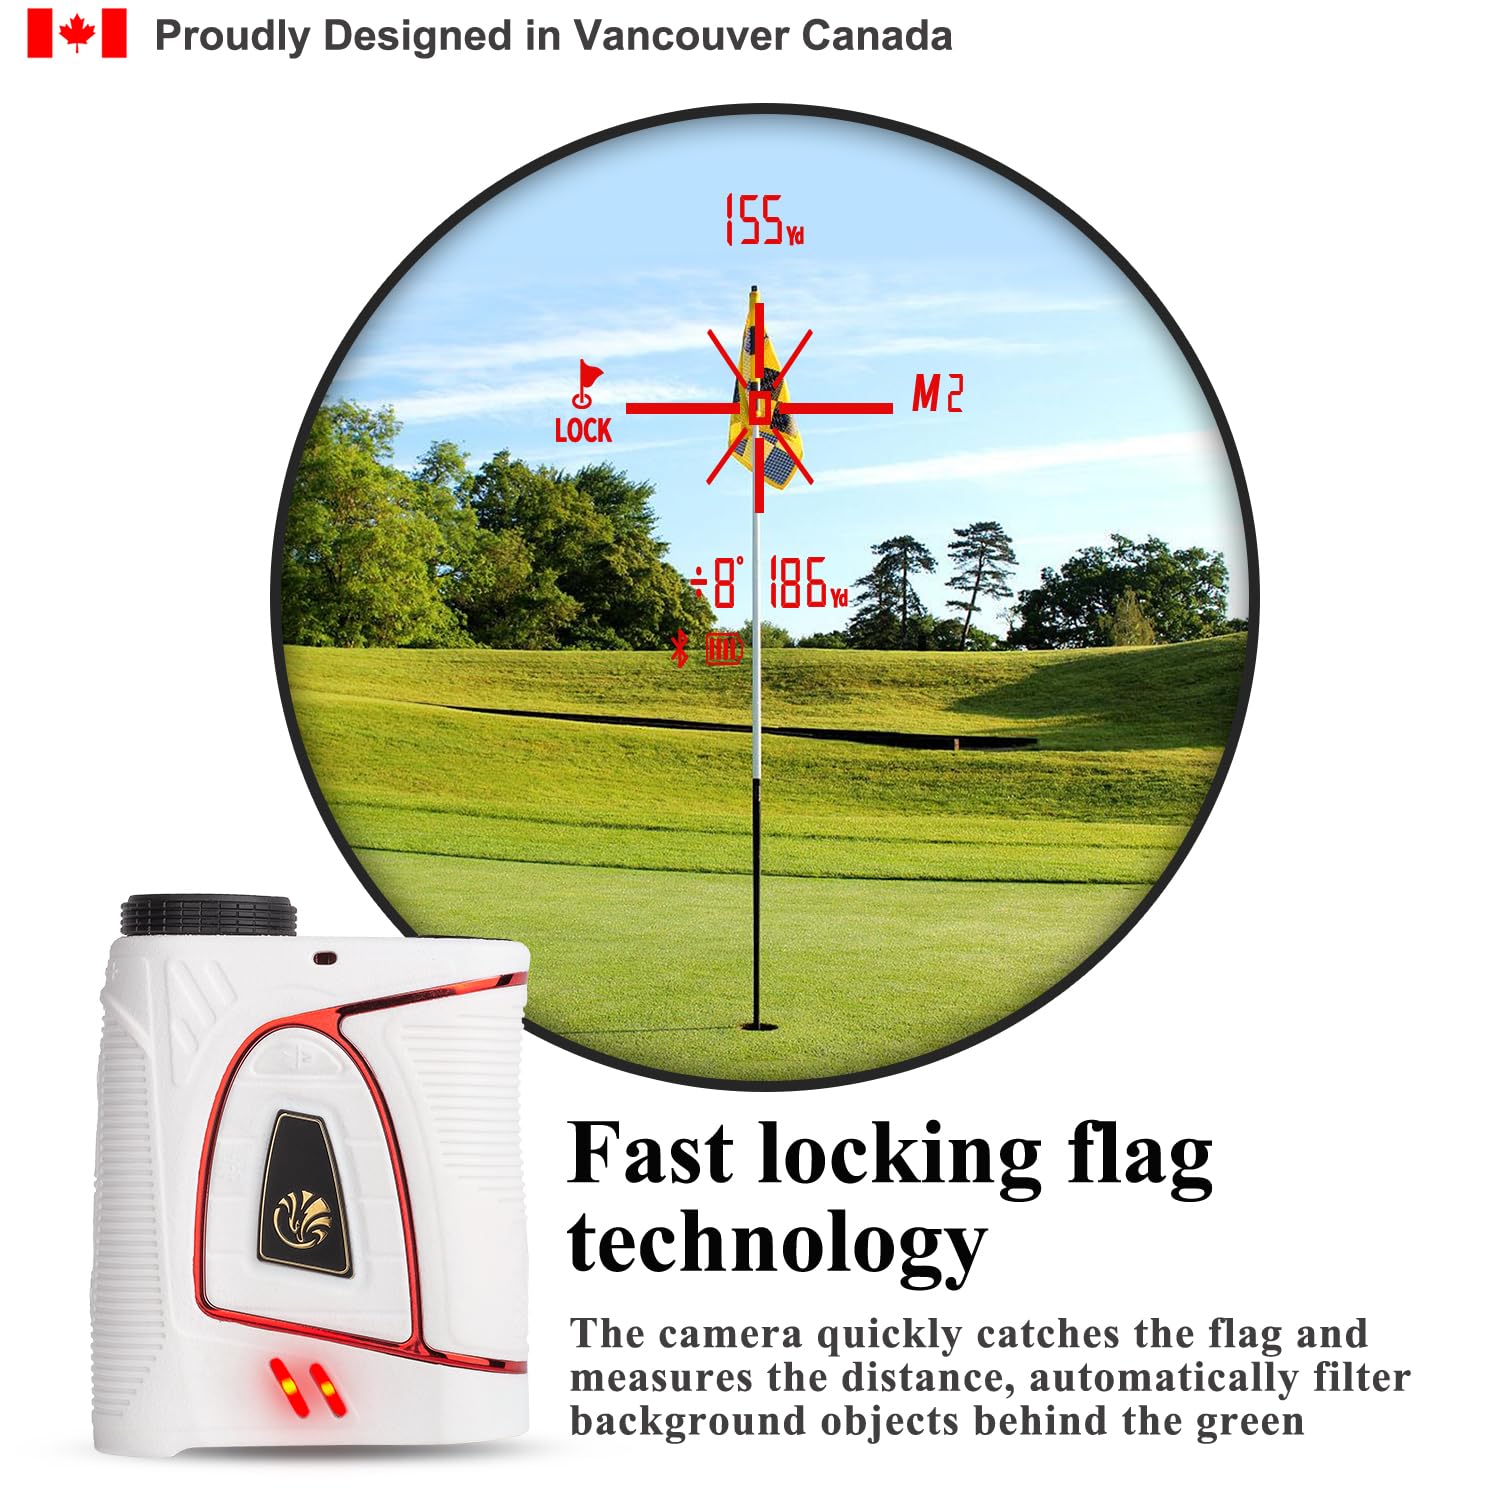 Fetch Falcon OLED Golf Range Finder Up to 2500YD (2023 Third Generation 6X Maganification High Precision, Slope Mode with Scan) Pole Flag Locking Vibration for Golf (Powerful Magnet White)